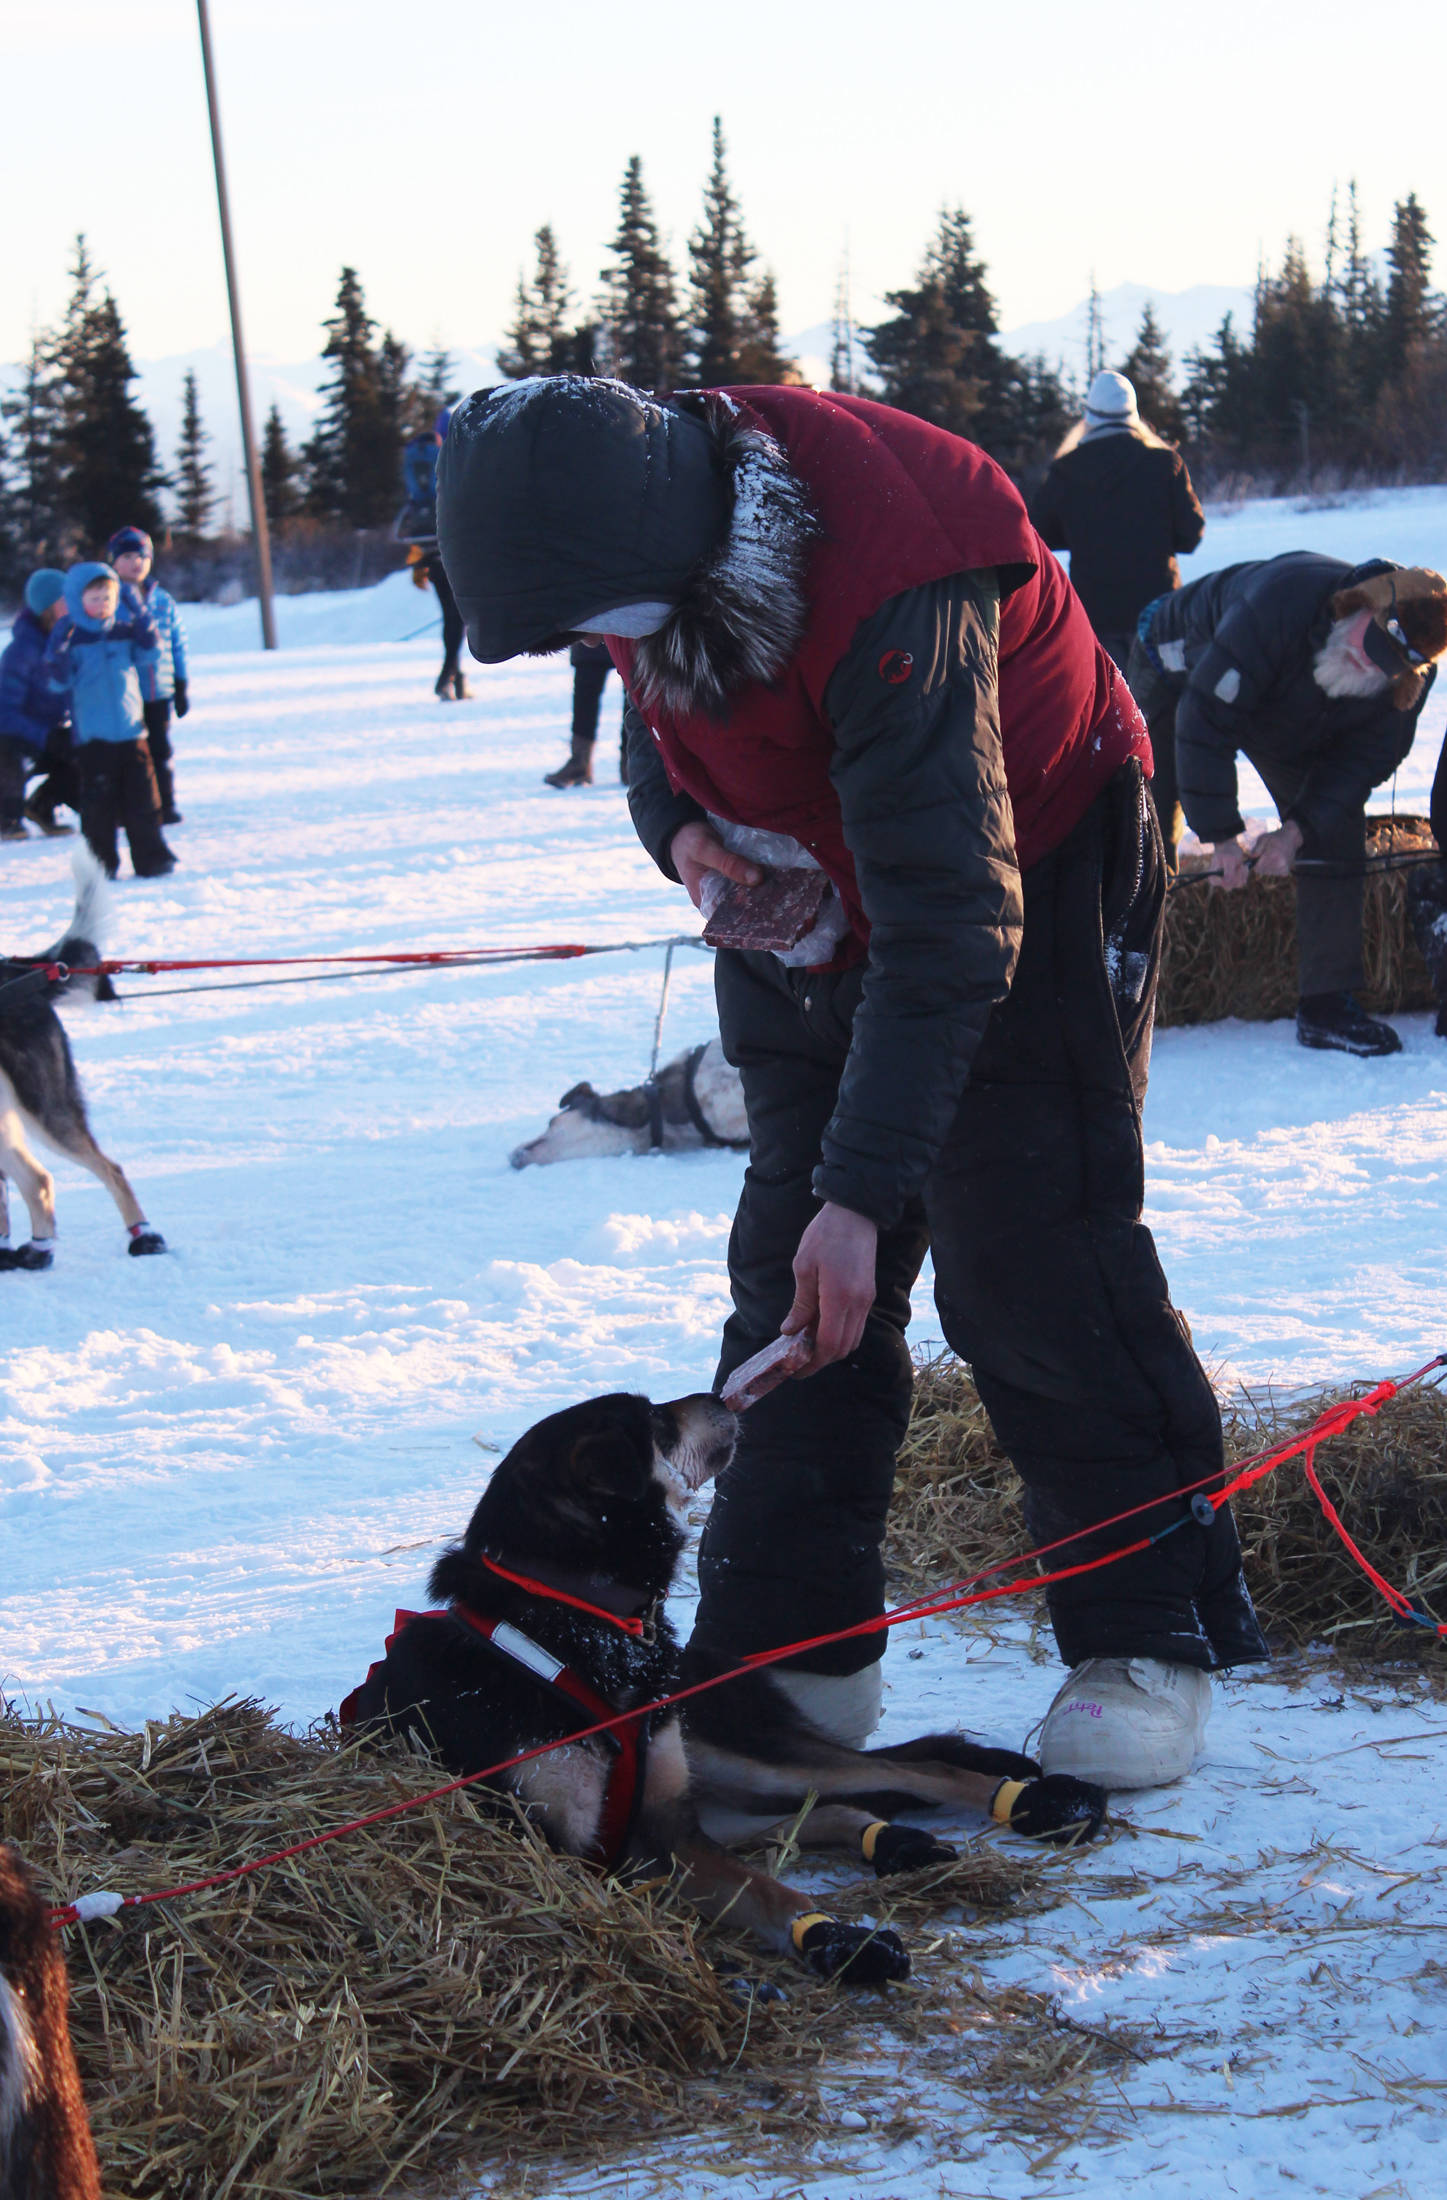 Nicolas Petit feeds a frozen piece of meat to one of his dogs while the rest at a checkpoint in the Tustumena 200 Sled Dog Race on Saturday, Jan. 27, 2018 at McNeil Canyon Elementary School near Homer, Alaska. Each musher must spend a minimum of 10 hours resting throughout the race at any of three checkpoints. (Photo by Megan Pacer/Homer News)